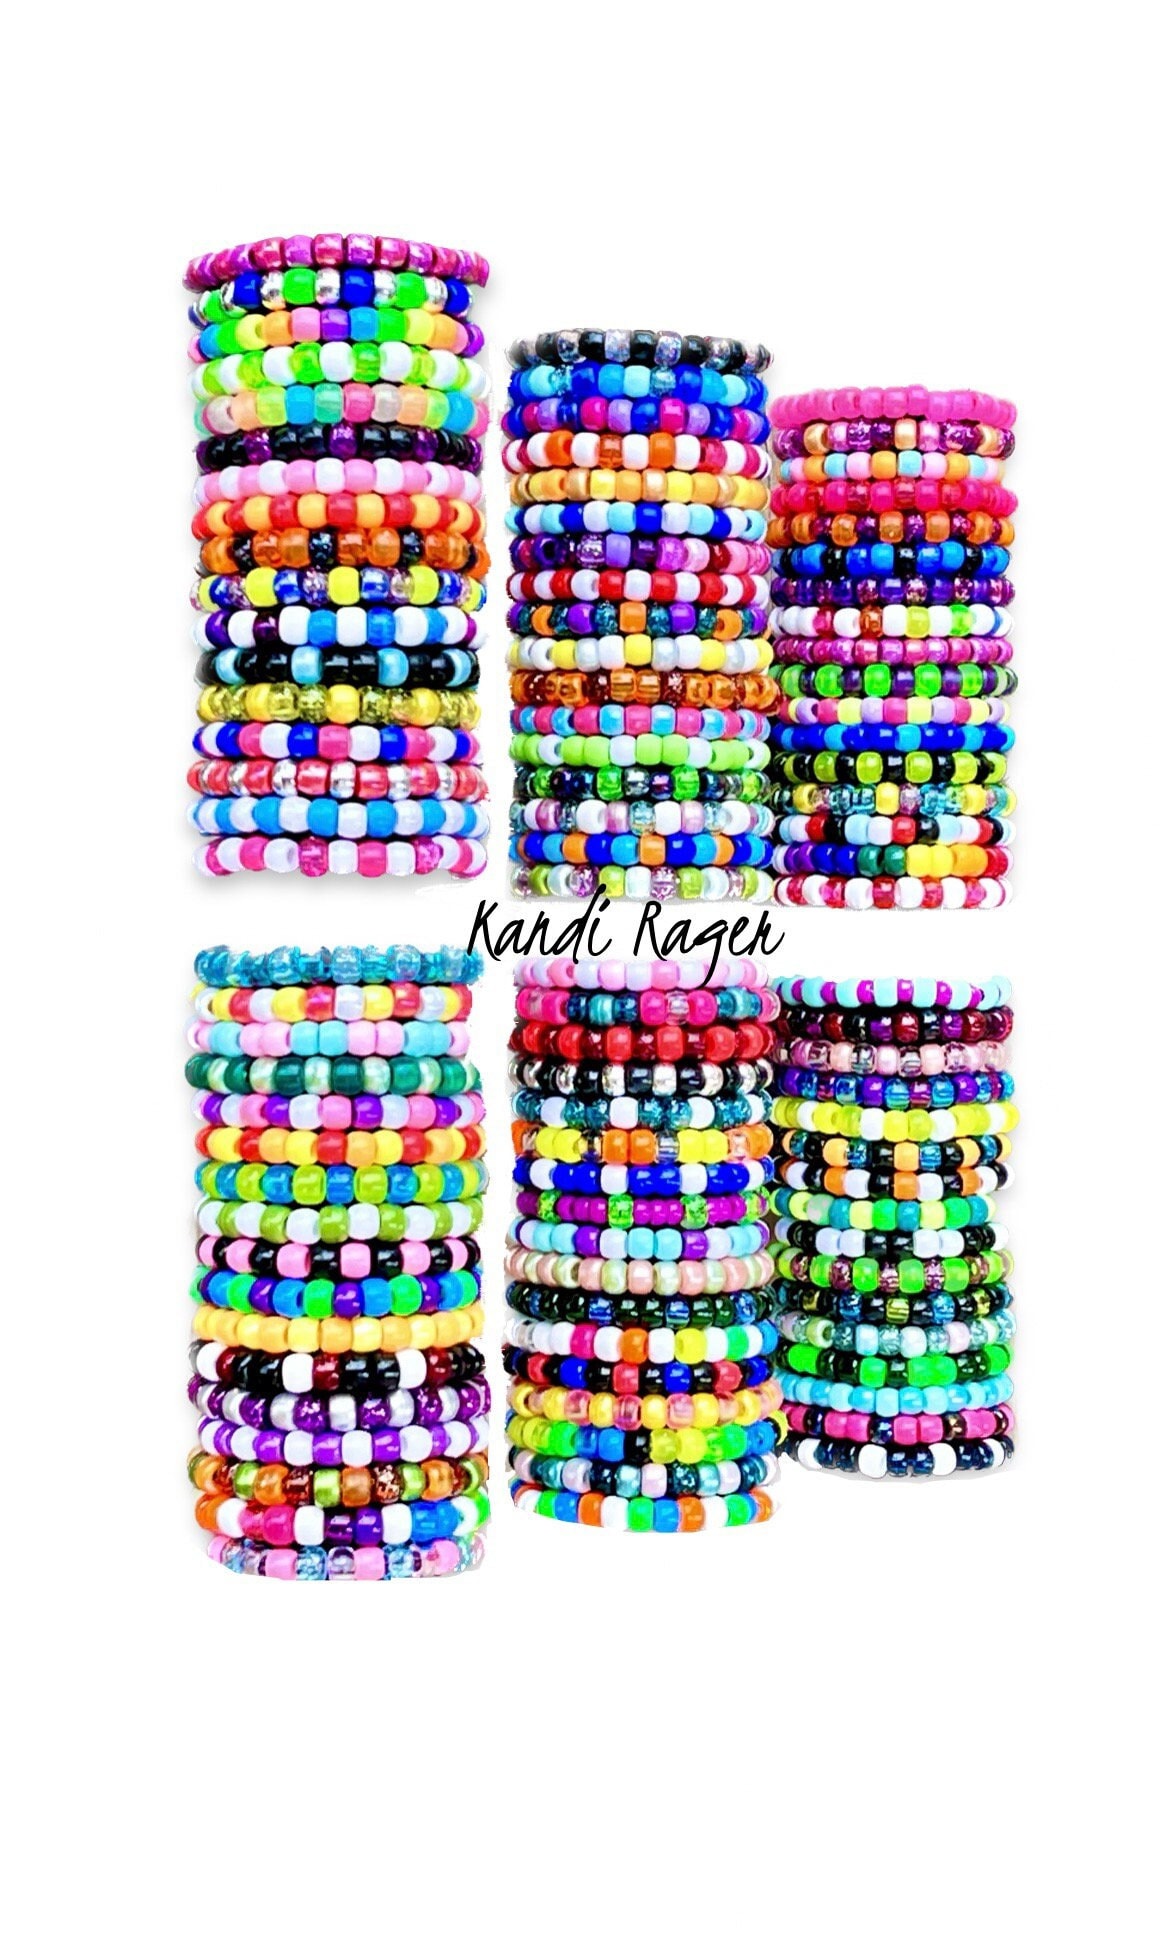 Handmade Kandi Bead Bracelets for Festivals, Parties, Raves, and More! PLUR Fun (12-Pack) (Good Vibes)